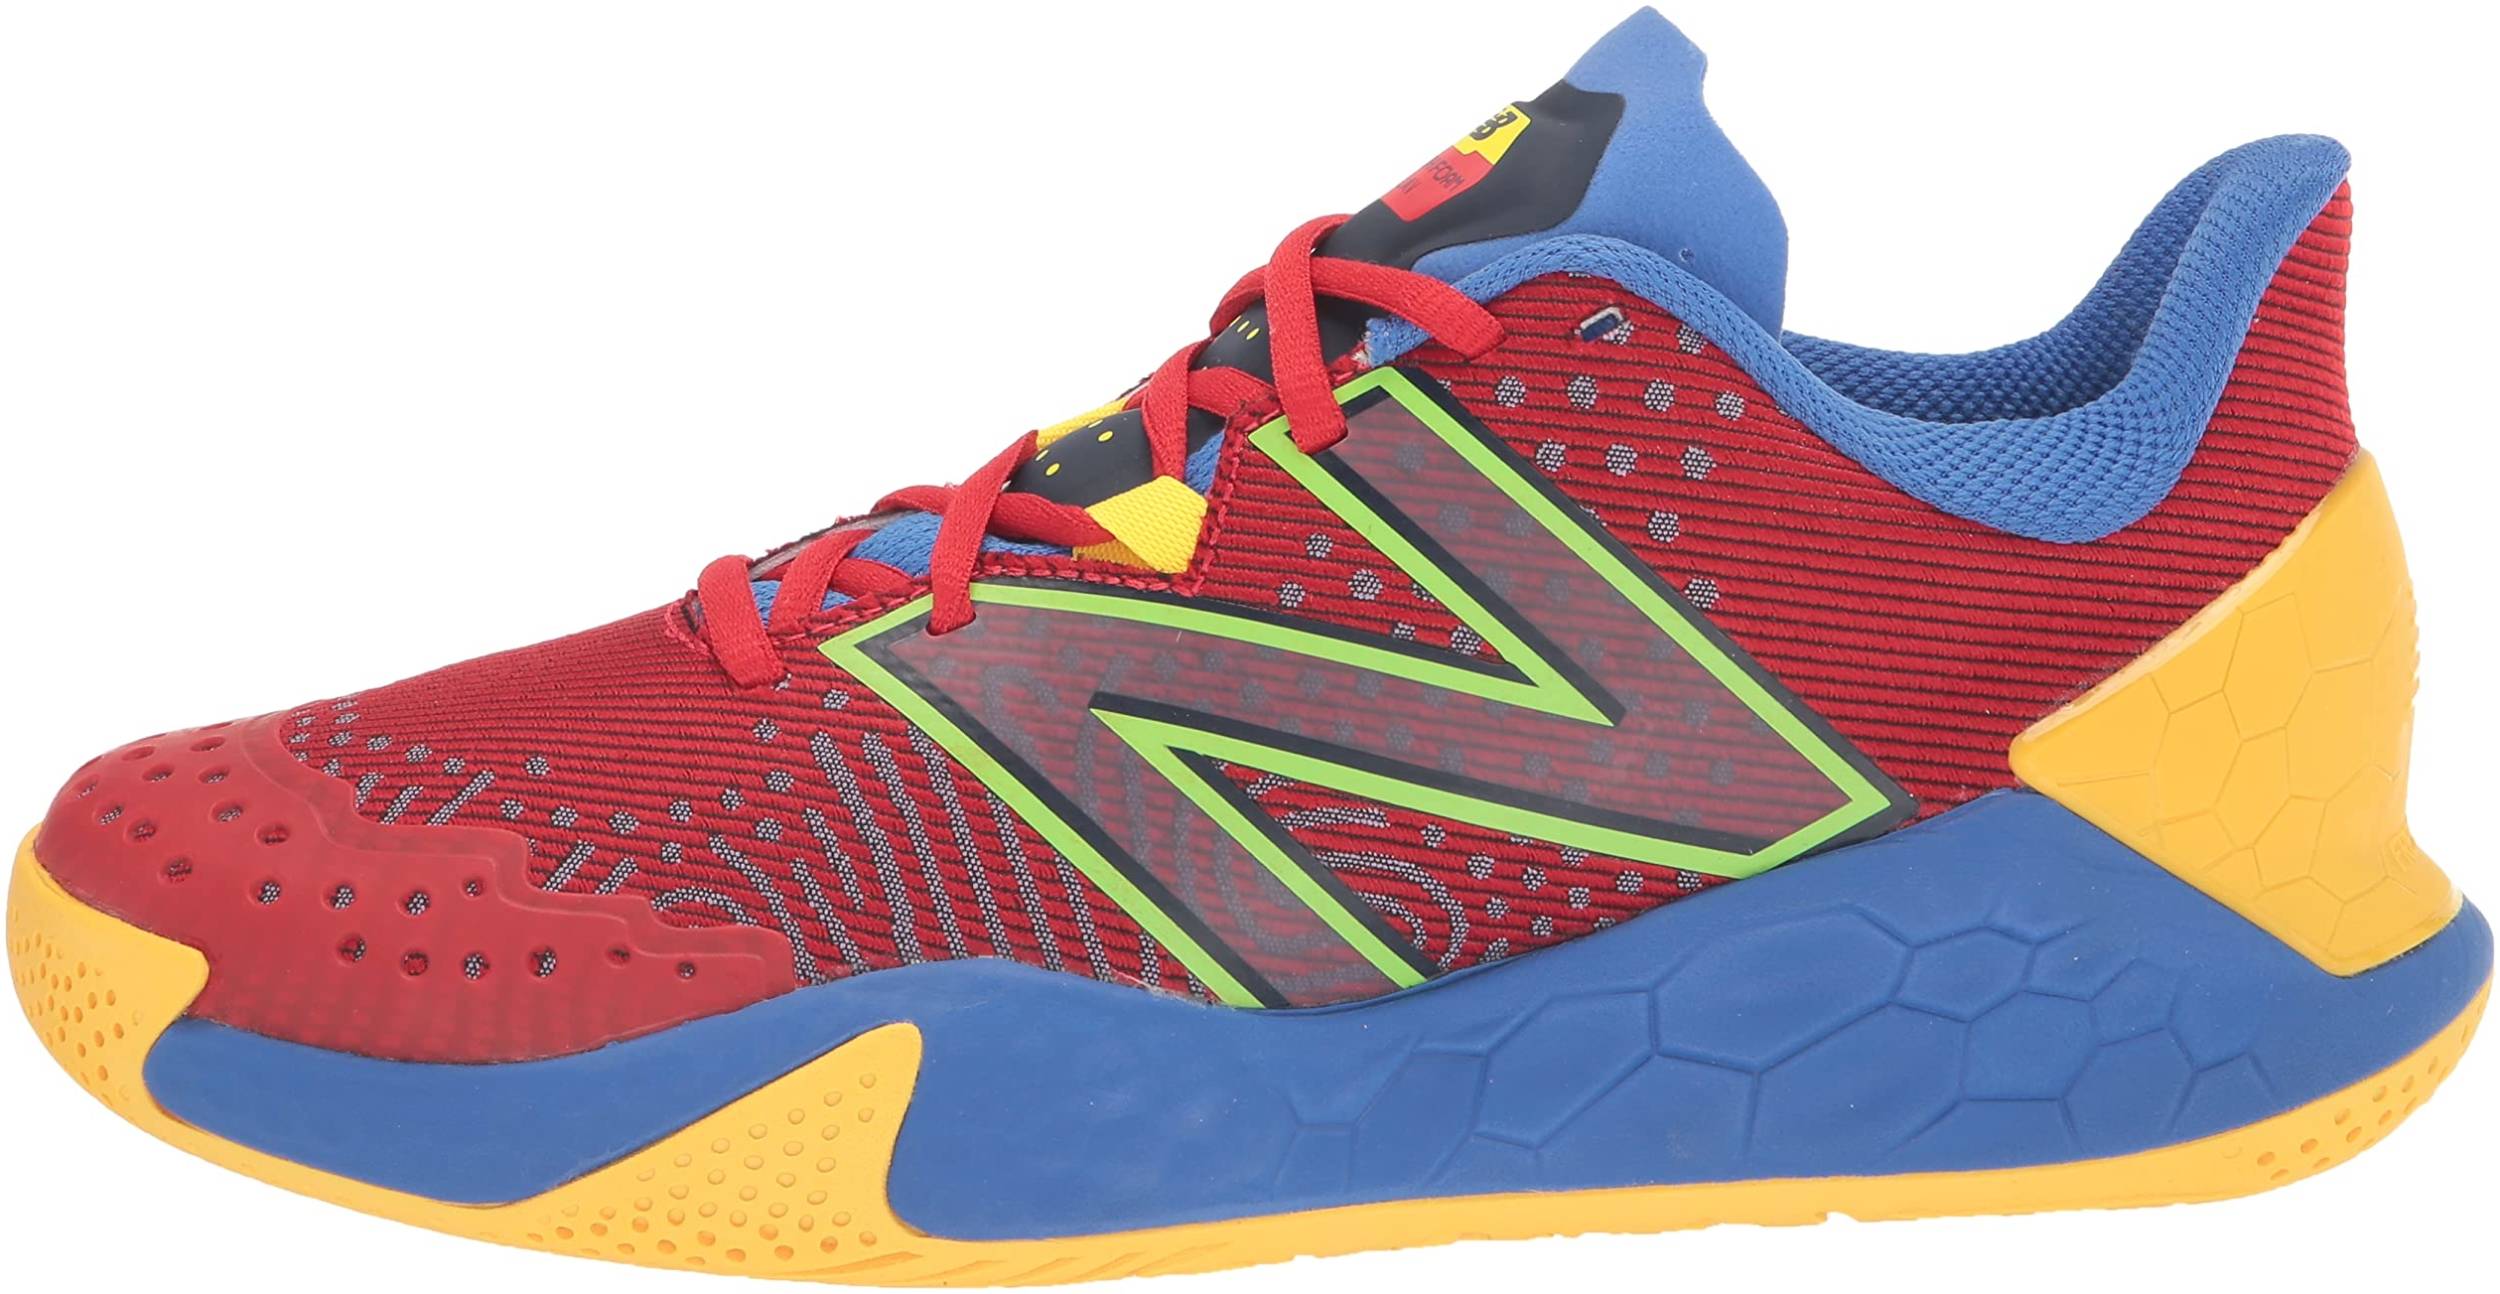 New Balance Tennis Shoes: Level Up Your Athletic Glam Game